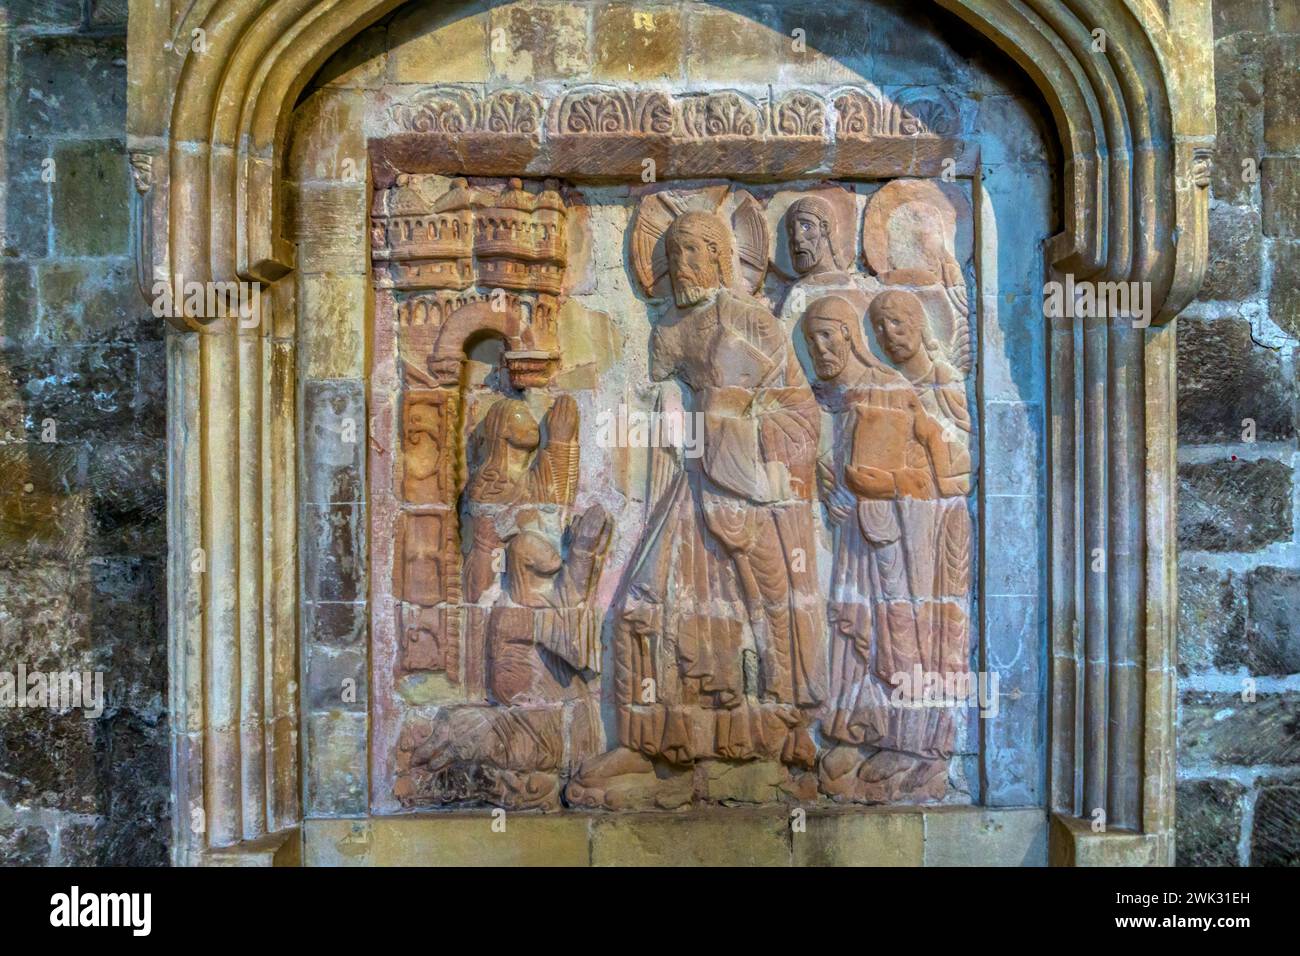 The Chichester Reliefs.  One of two carved panels from about 1125 showing Jesus raising Lazarus from the dead.  See 2WJ0MF7 for other relief. Stock Photo